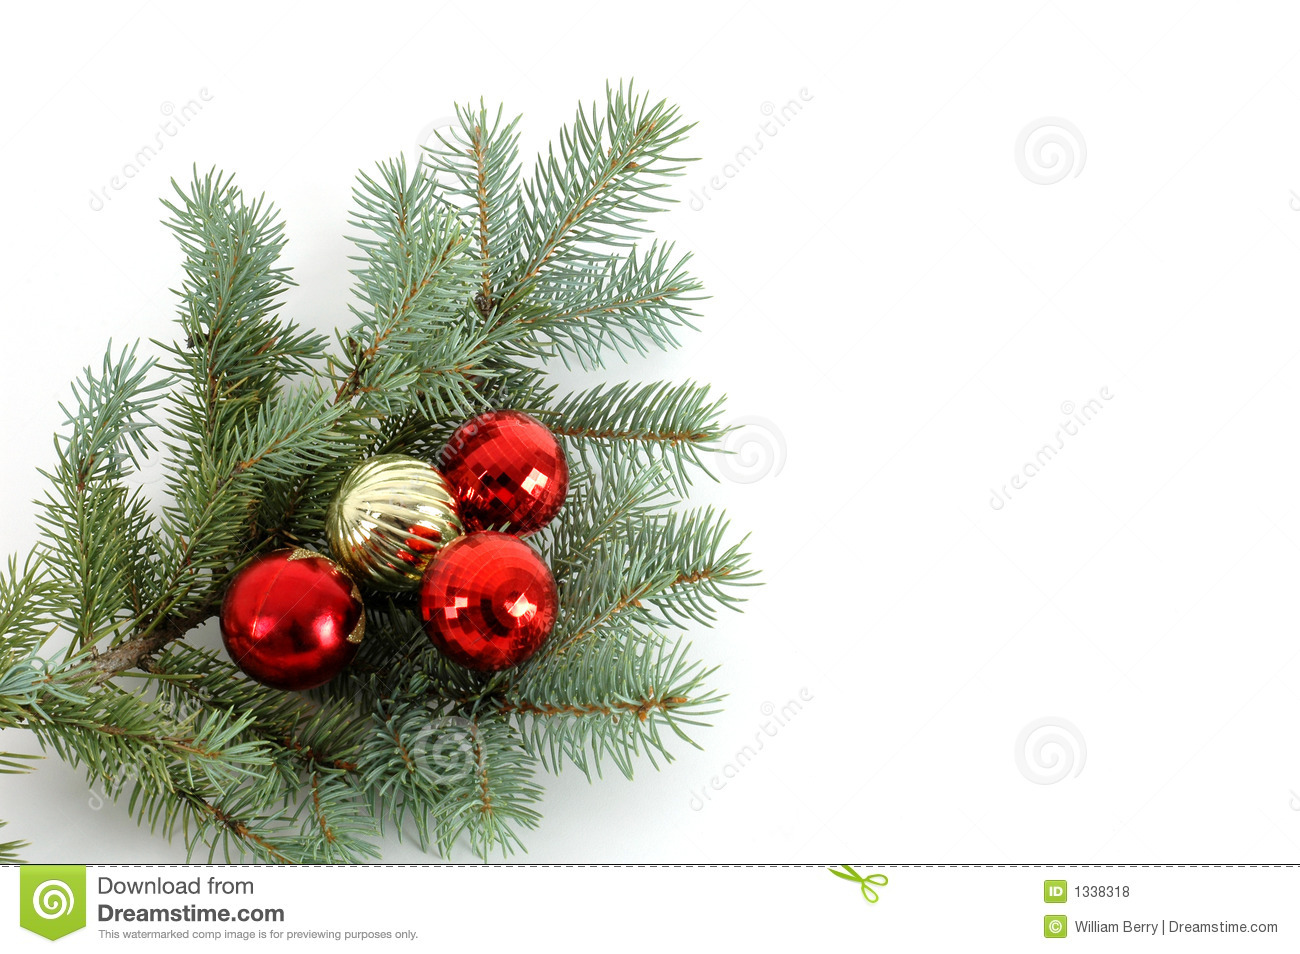 Decorated Christmas Bough  2 Royalty Free Stock Photos   Image    